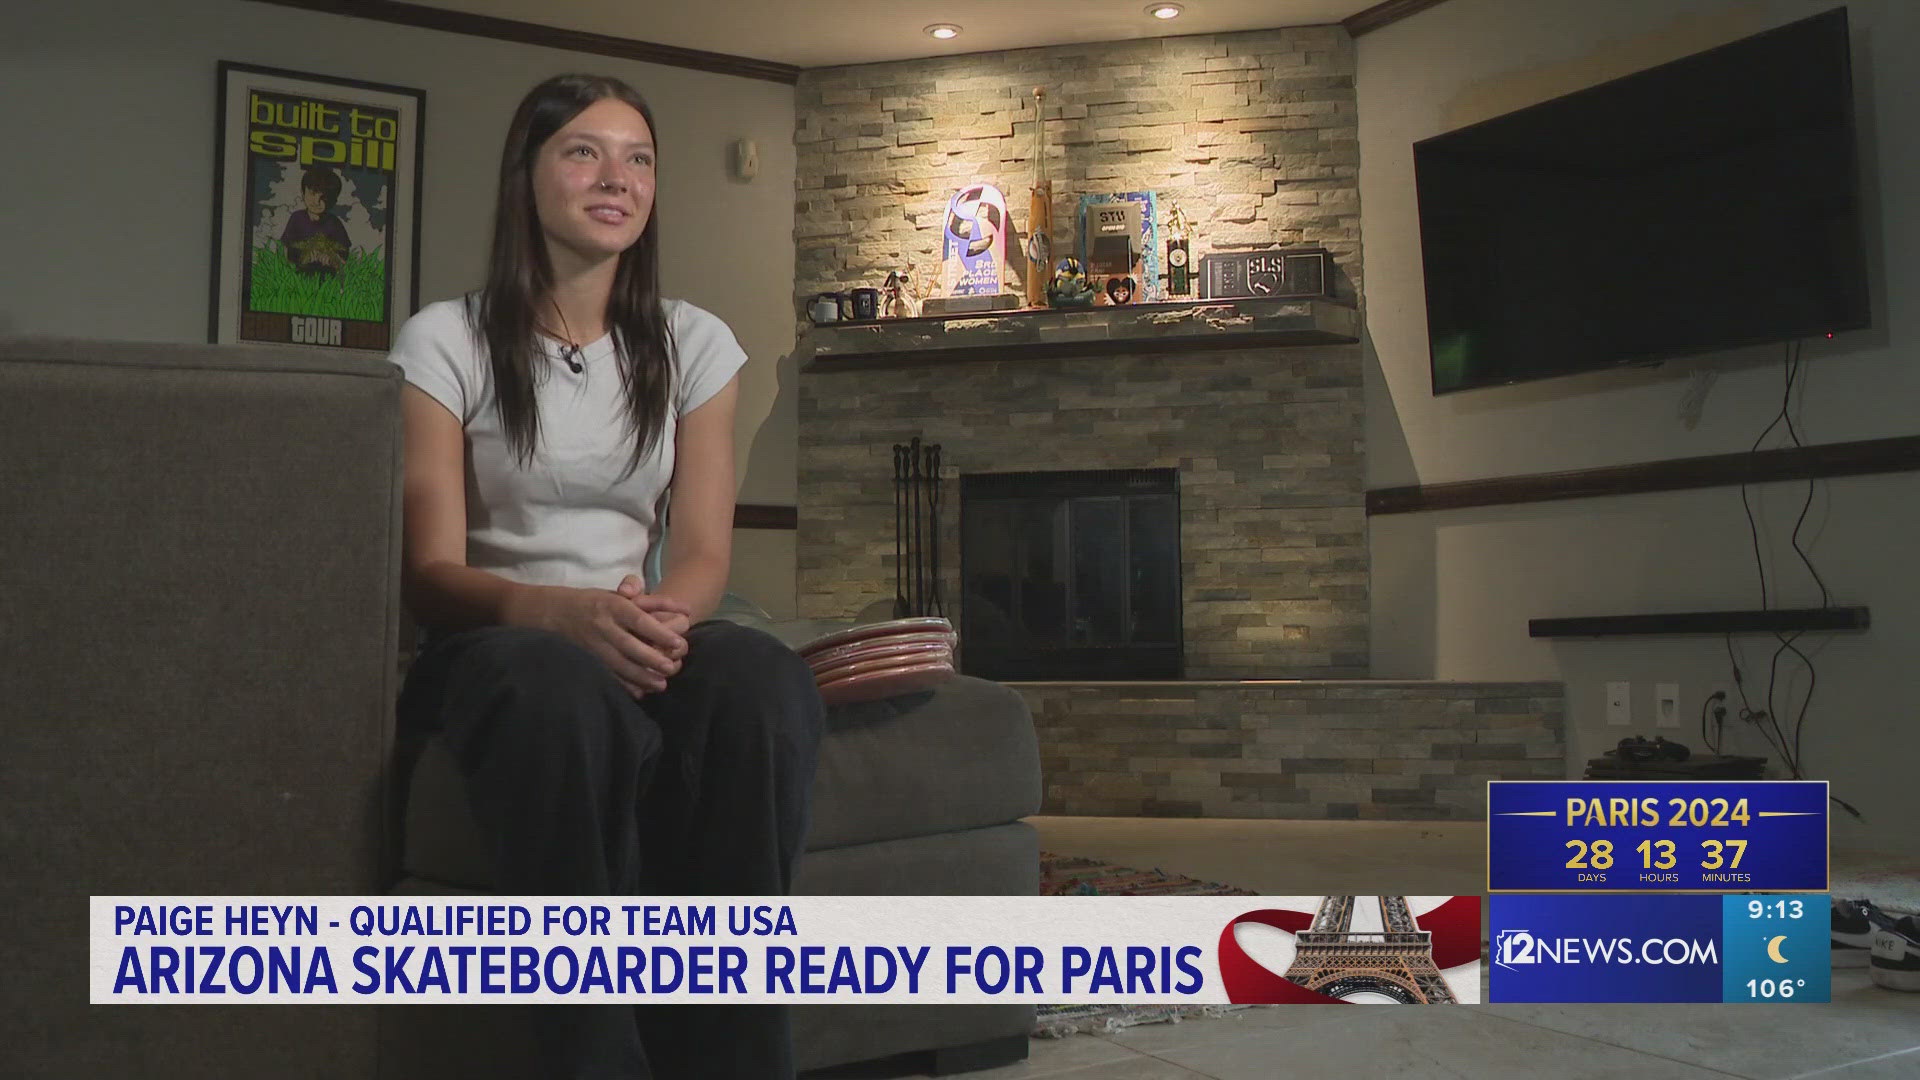 16-year-old Paige Heyn is from the Valley and talks about how a gift put her on the path to a promising skateboard career.